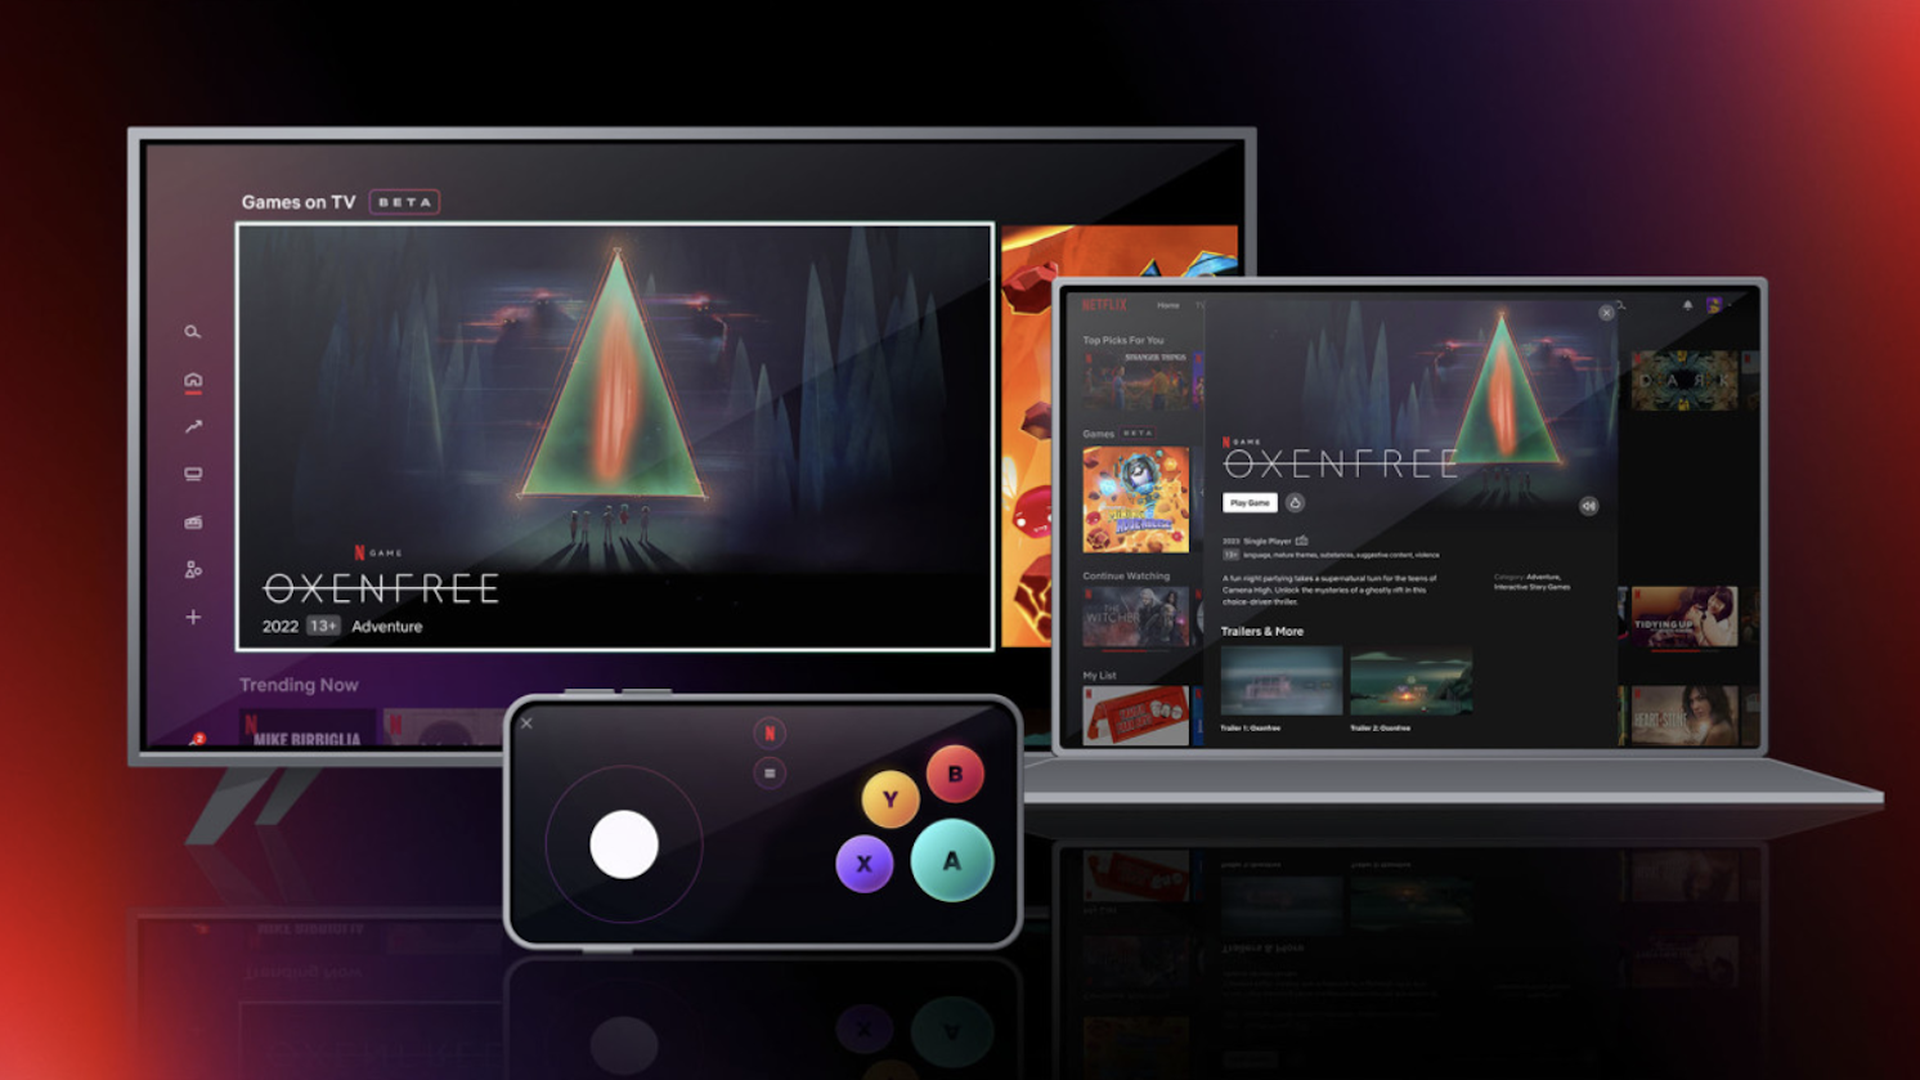 Computer rendering of a TV and laptop running a start screen for the game Oxenfree, plus a phone running a controller app that puts virtual buttons on the phone's screen